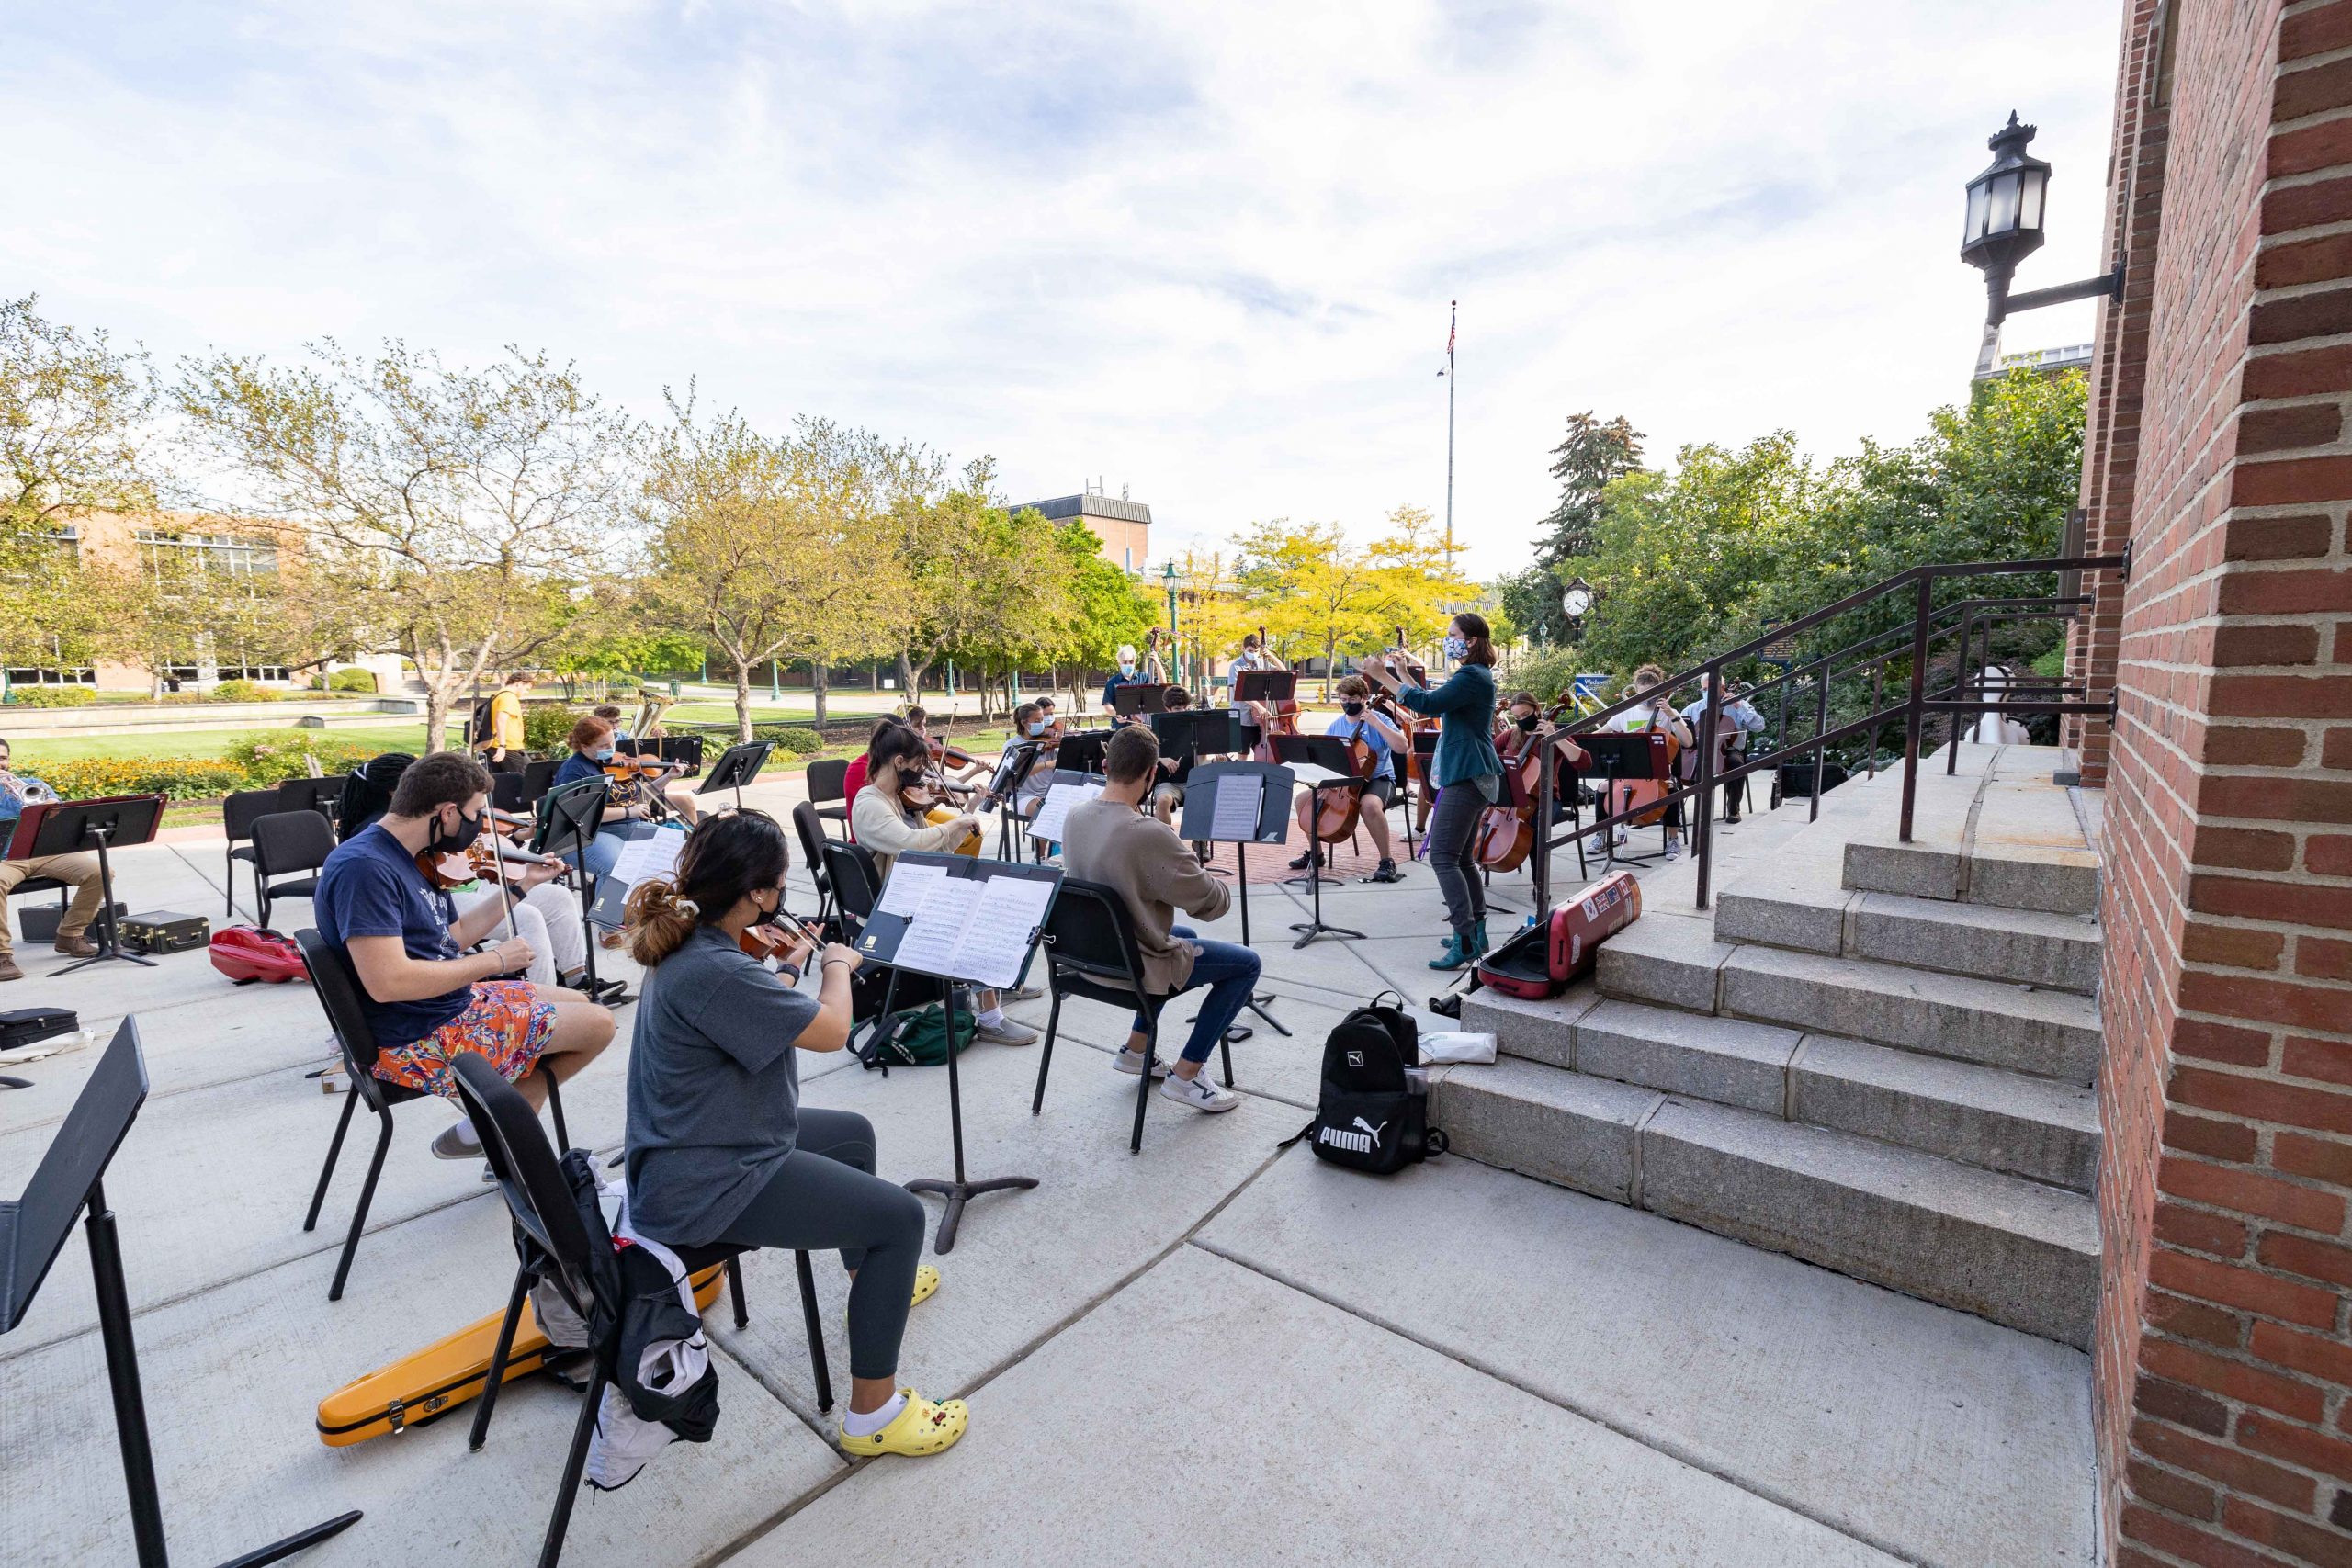 A string orchestra practices outside on a sidewalk near a campus quad.